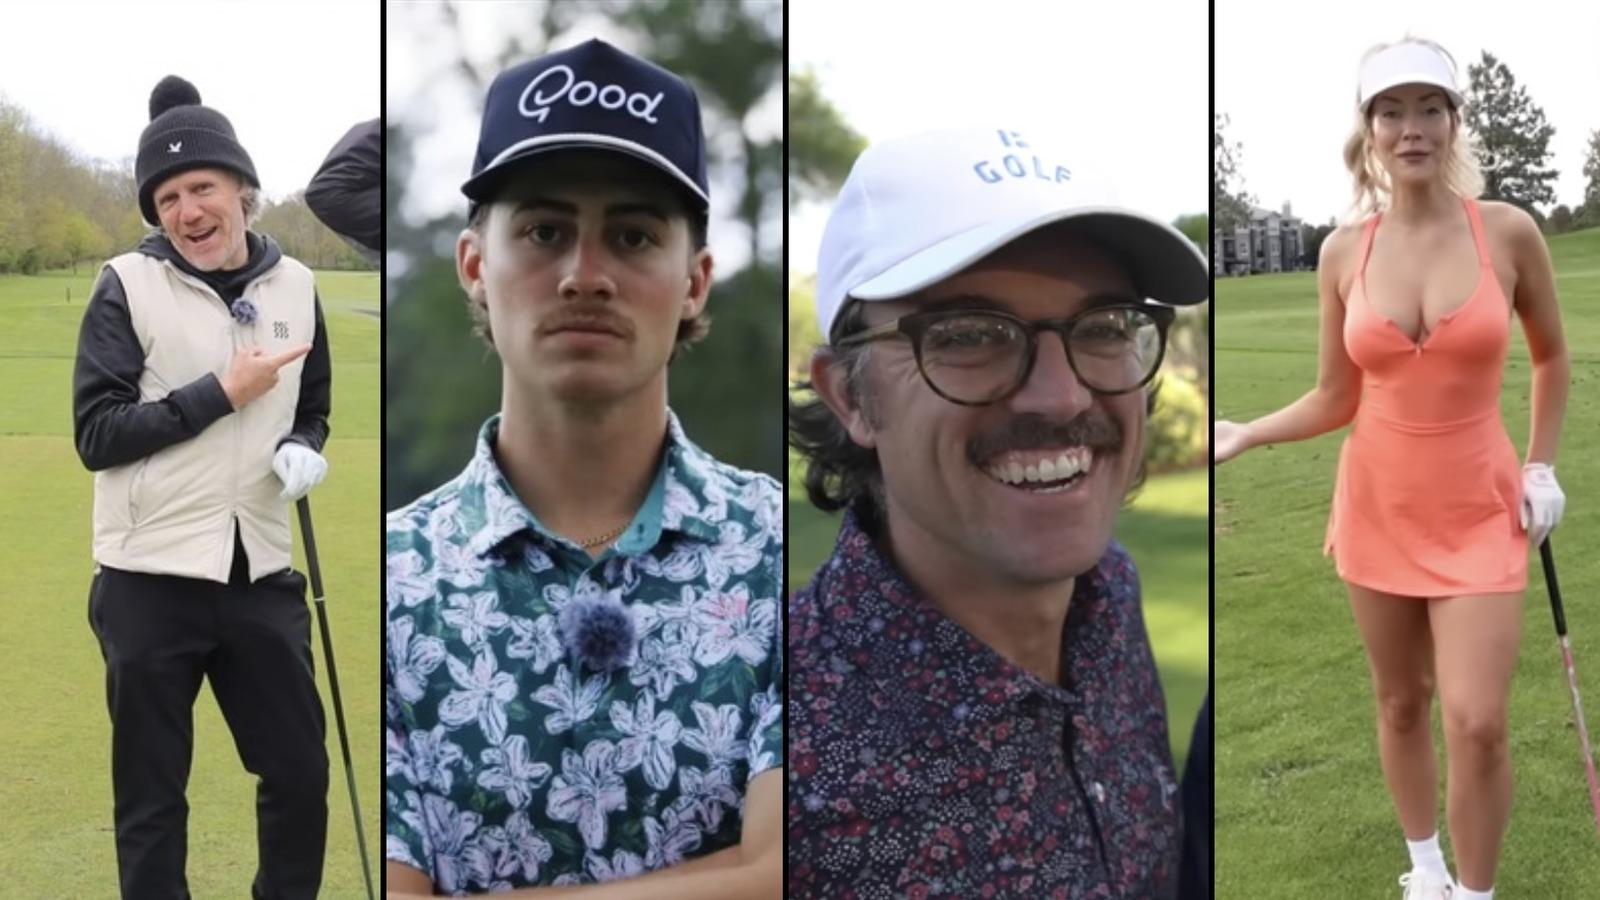 Who is the best golfer on YouTube? At Dexerto Sport, we’ve ranked the top 30 content creators in descending order.